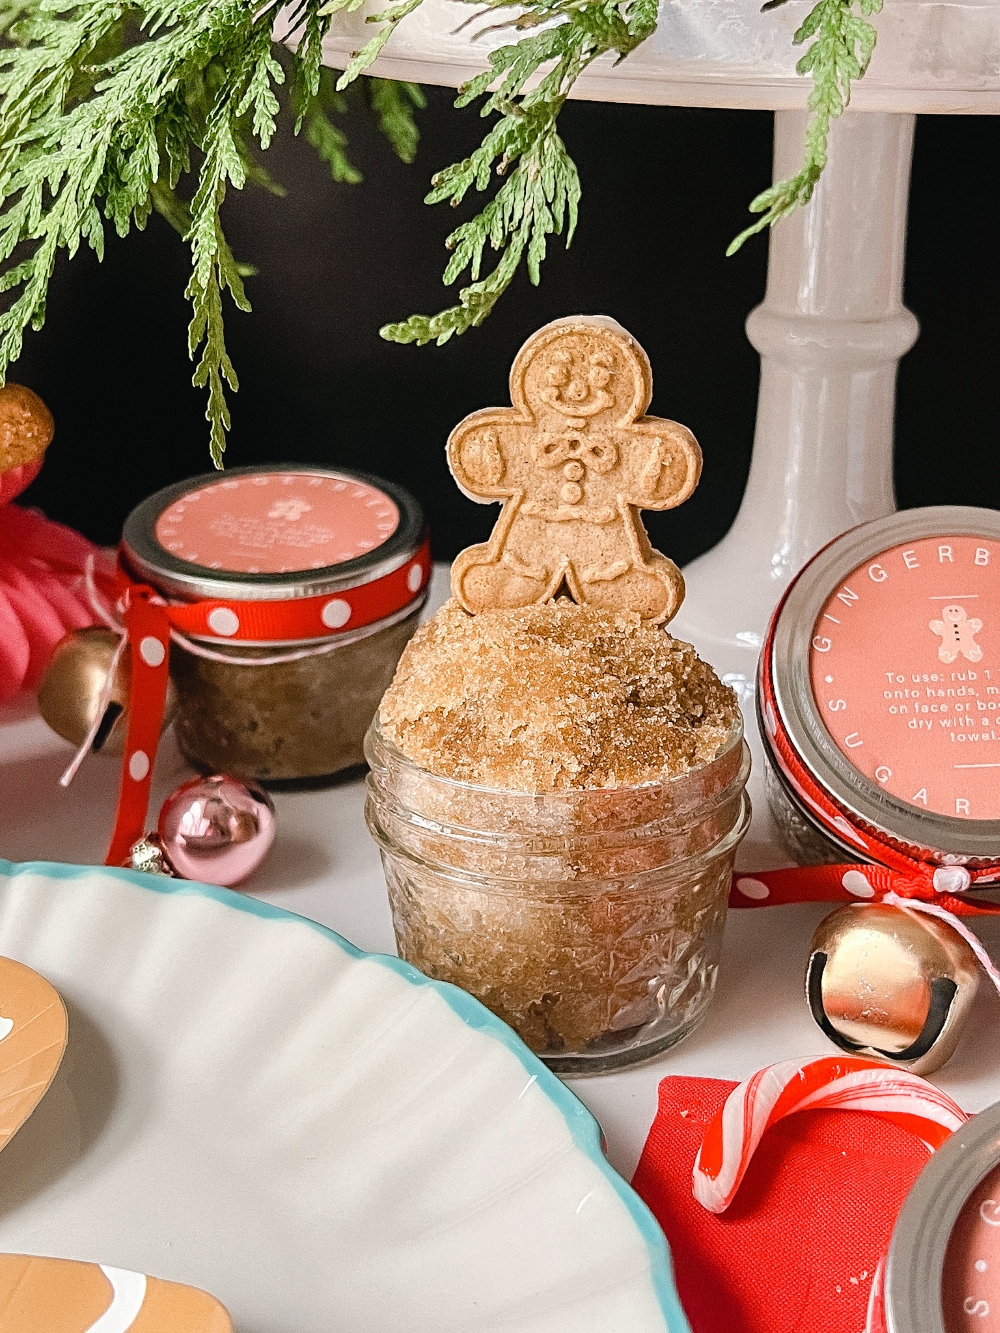 gredient Gingerbread Sugar Scrub. This gingerbread sugar scrub smell like cookies while it exfoliates and invigorates the skin and it's a perfect gift idea for anyone on your list!